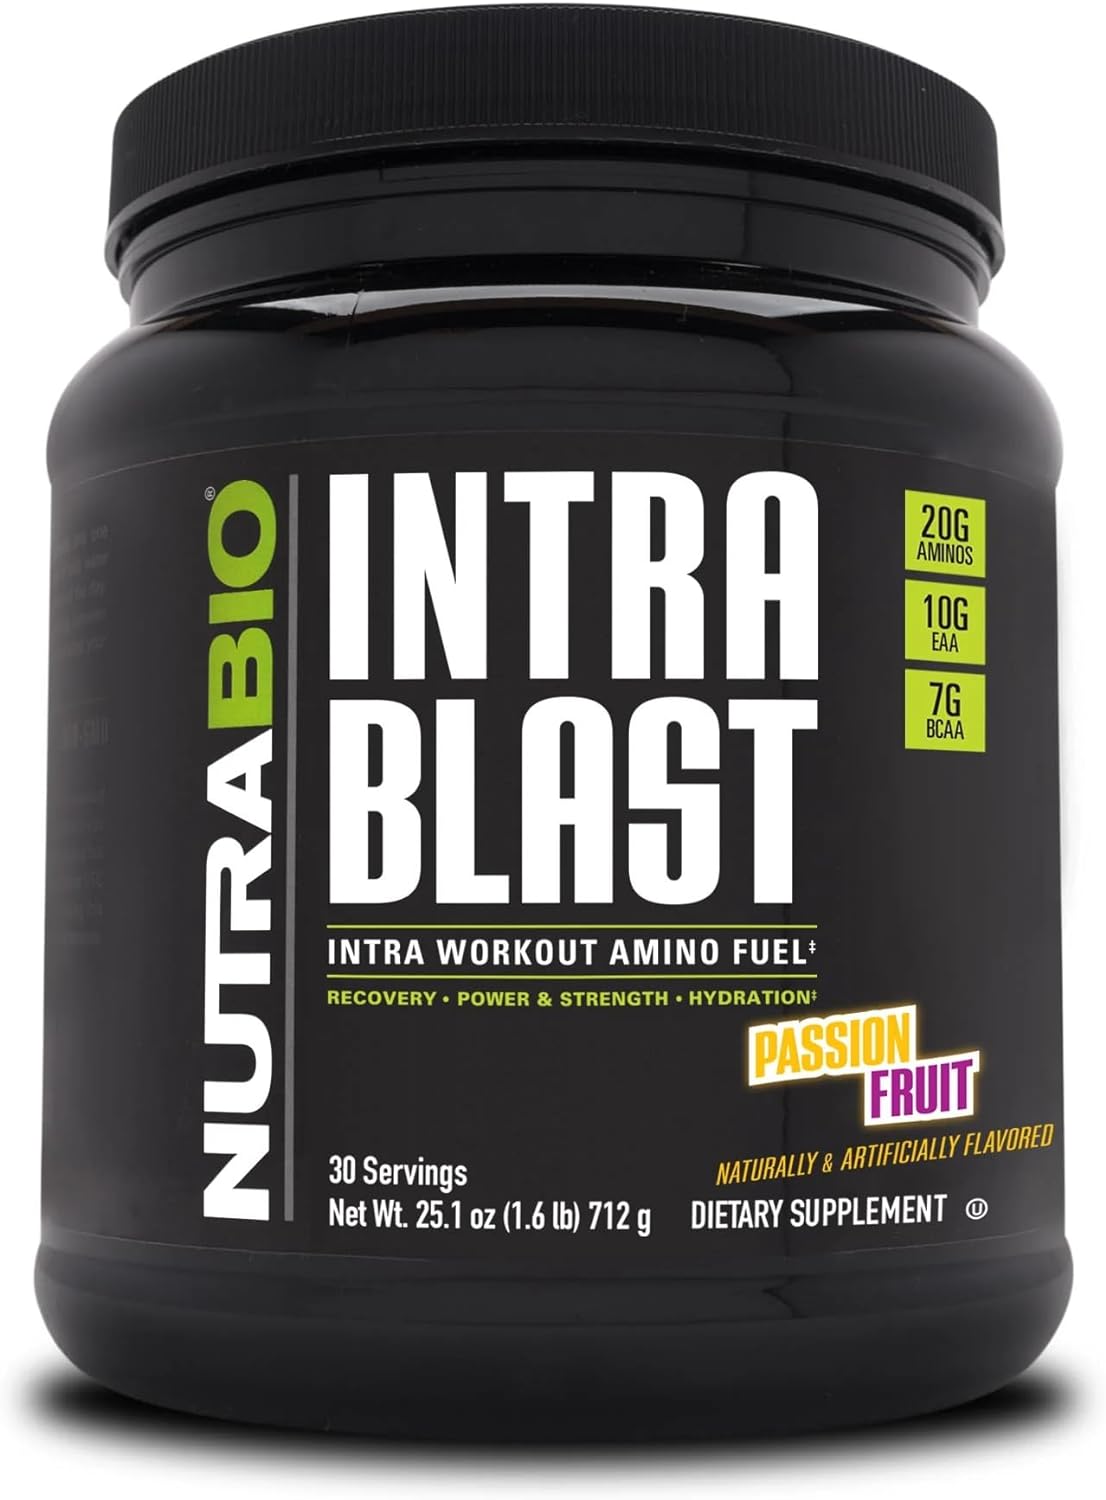 NutraBio Intra Blast and Pre-Workout Powder - Advanced Electrolyte Performance Drink - Amino Acid Recovery, EAA/BCAA Formula - Non-GMO and Gluten Free - Passion Fruit - 30 Servings